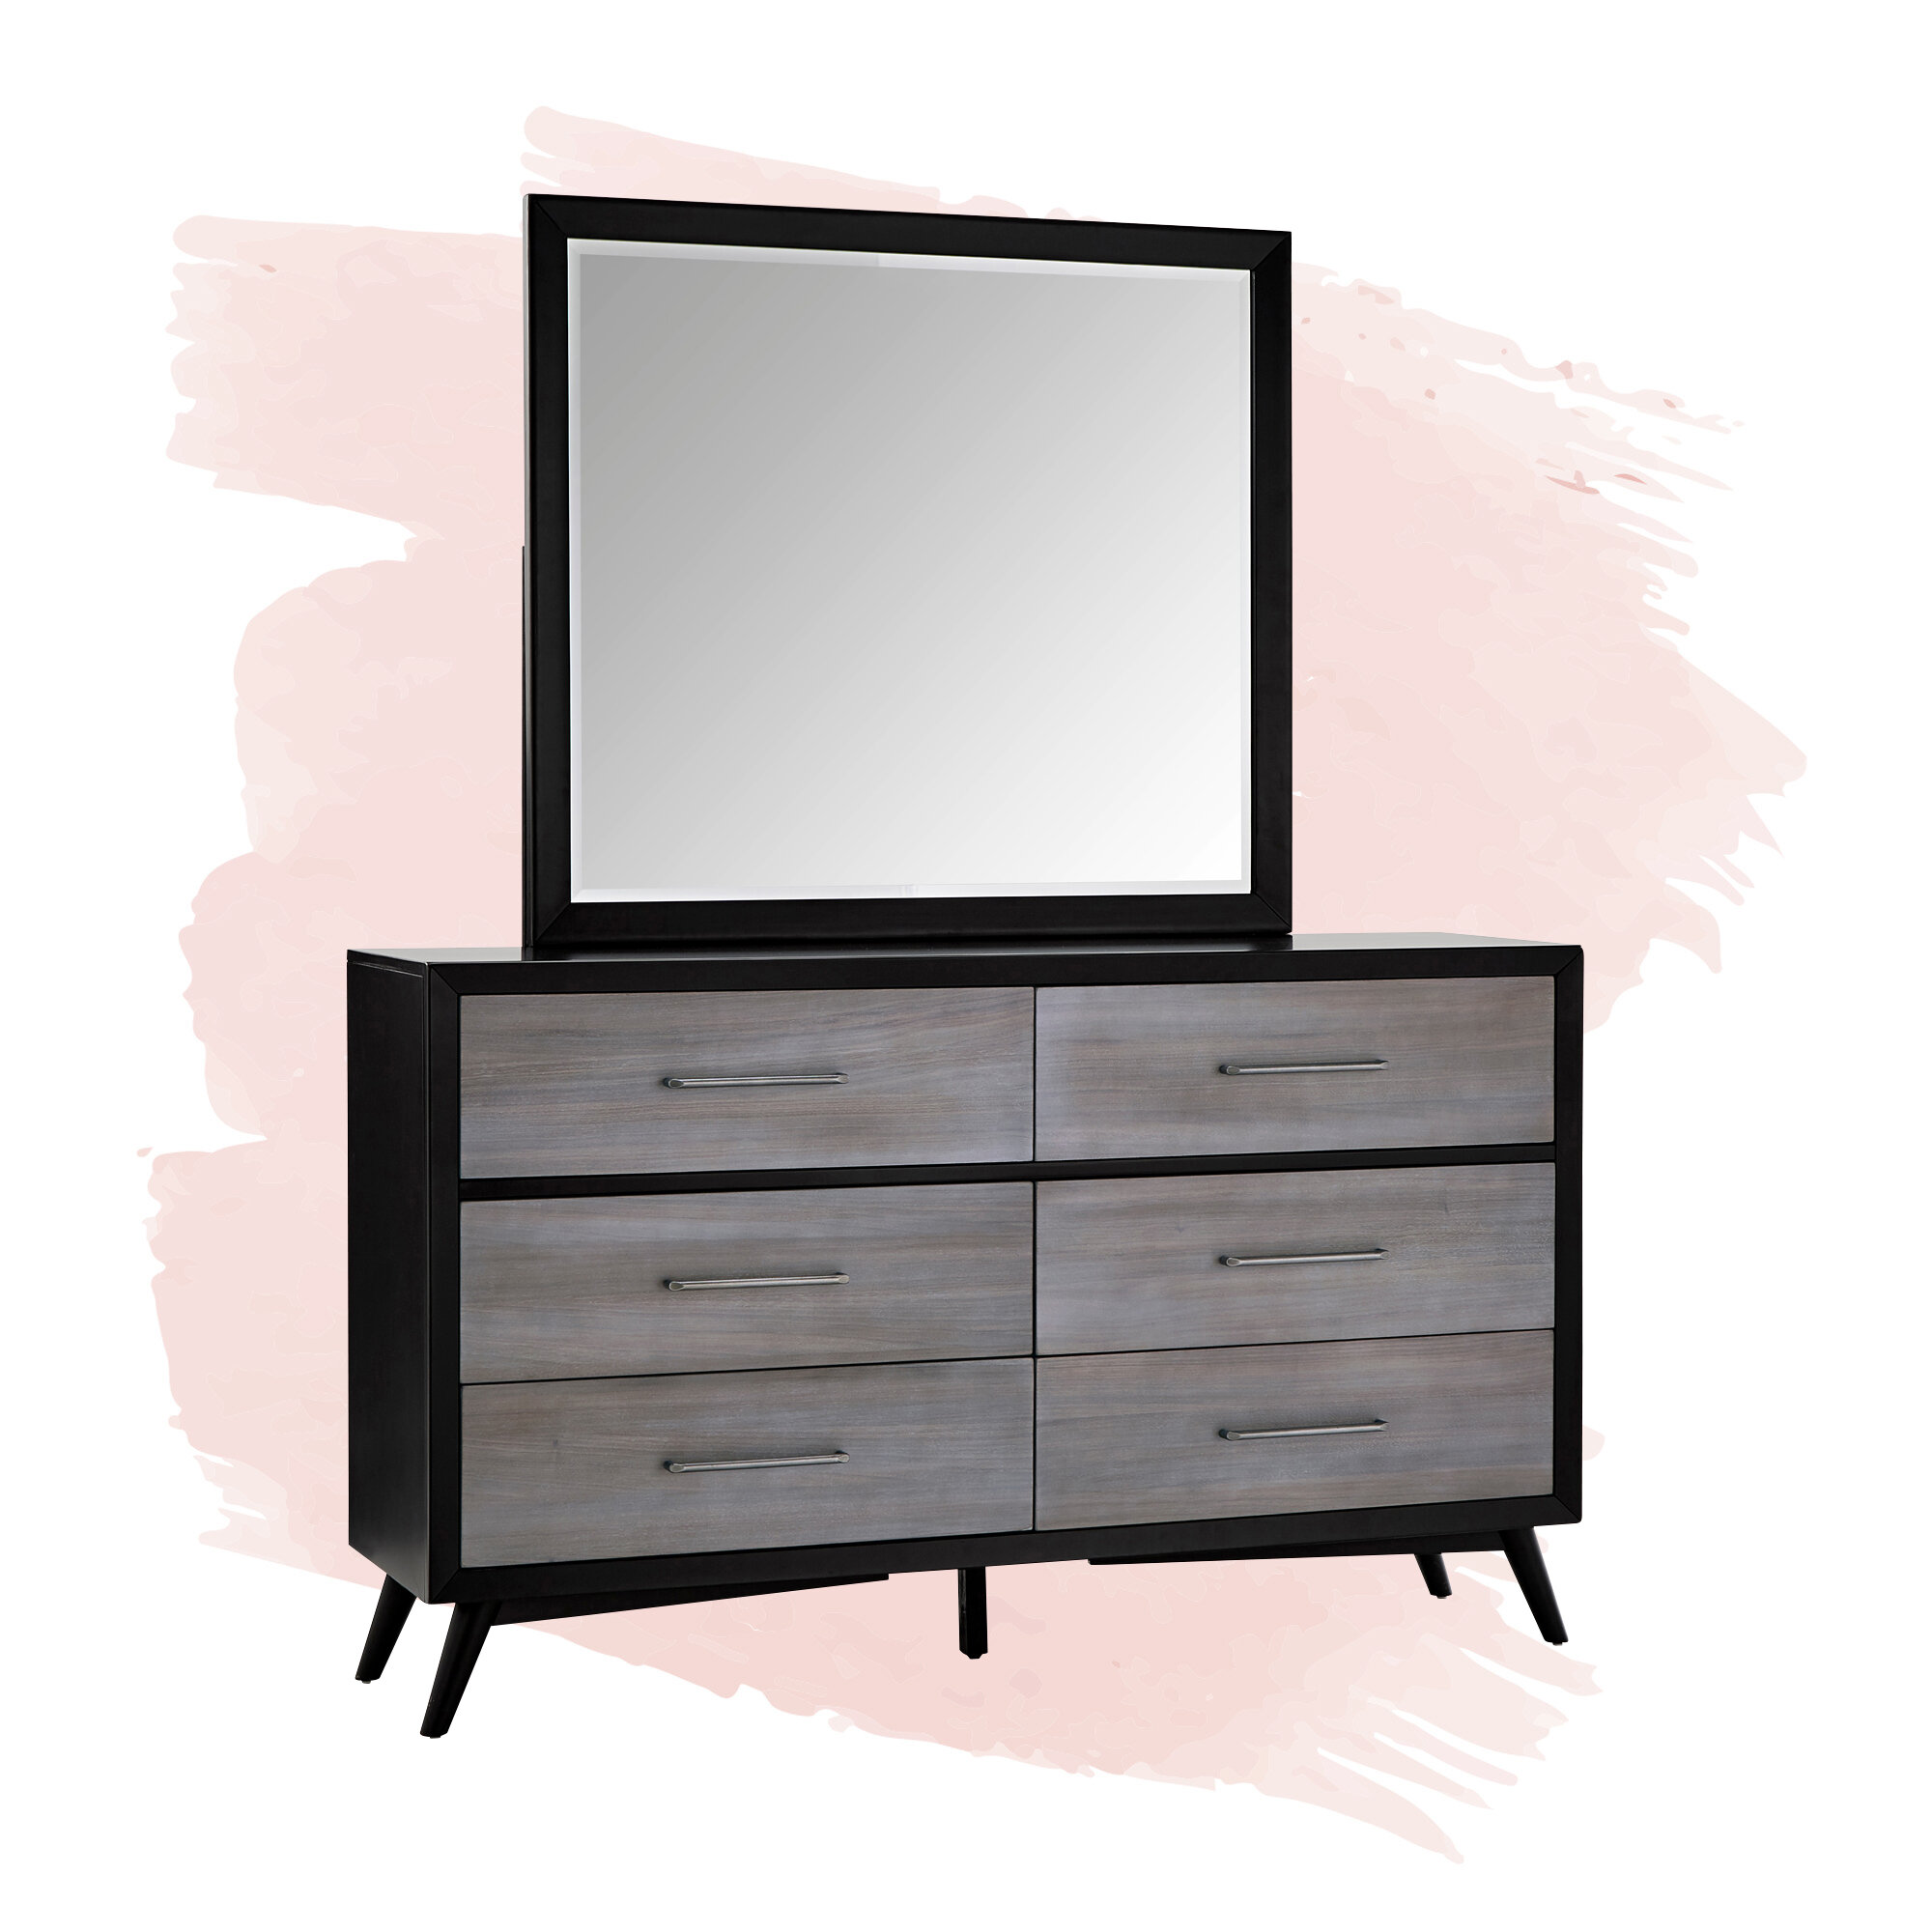 Foundstone Alleya 6 Drawer Double Dresser With Mirror Reviews